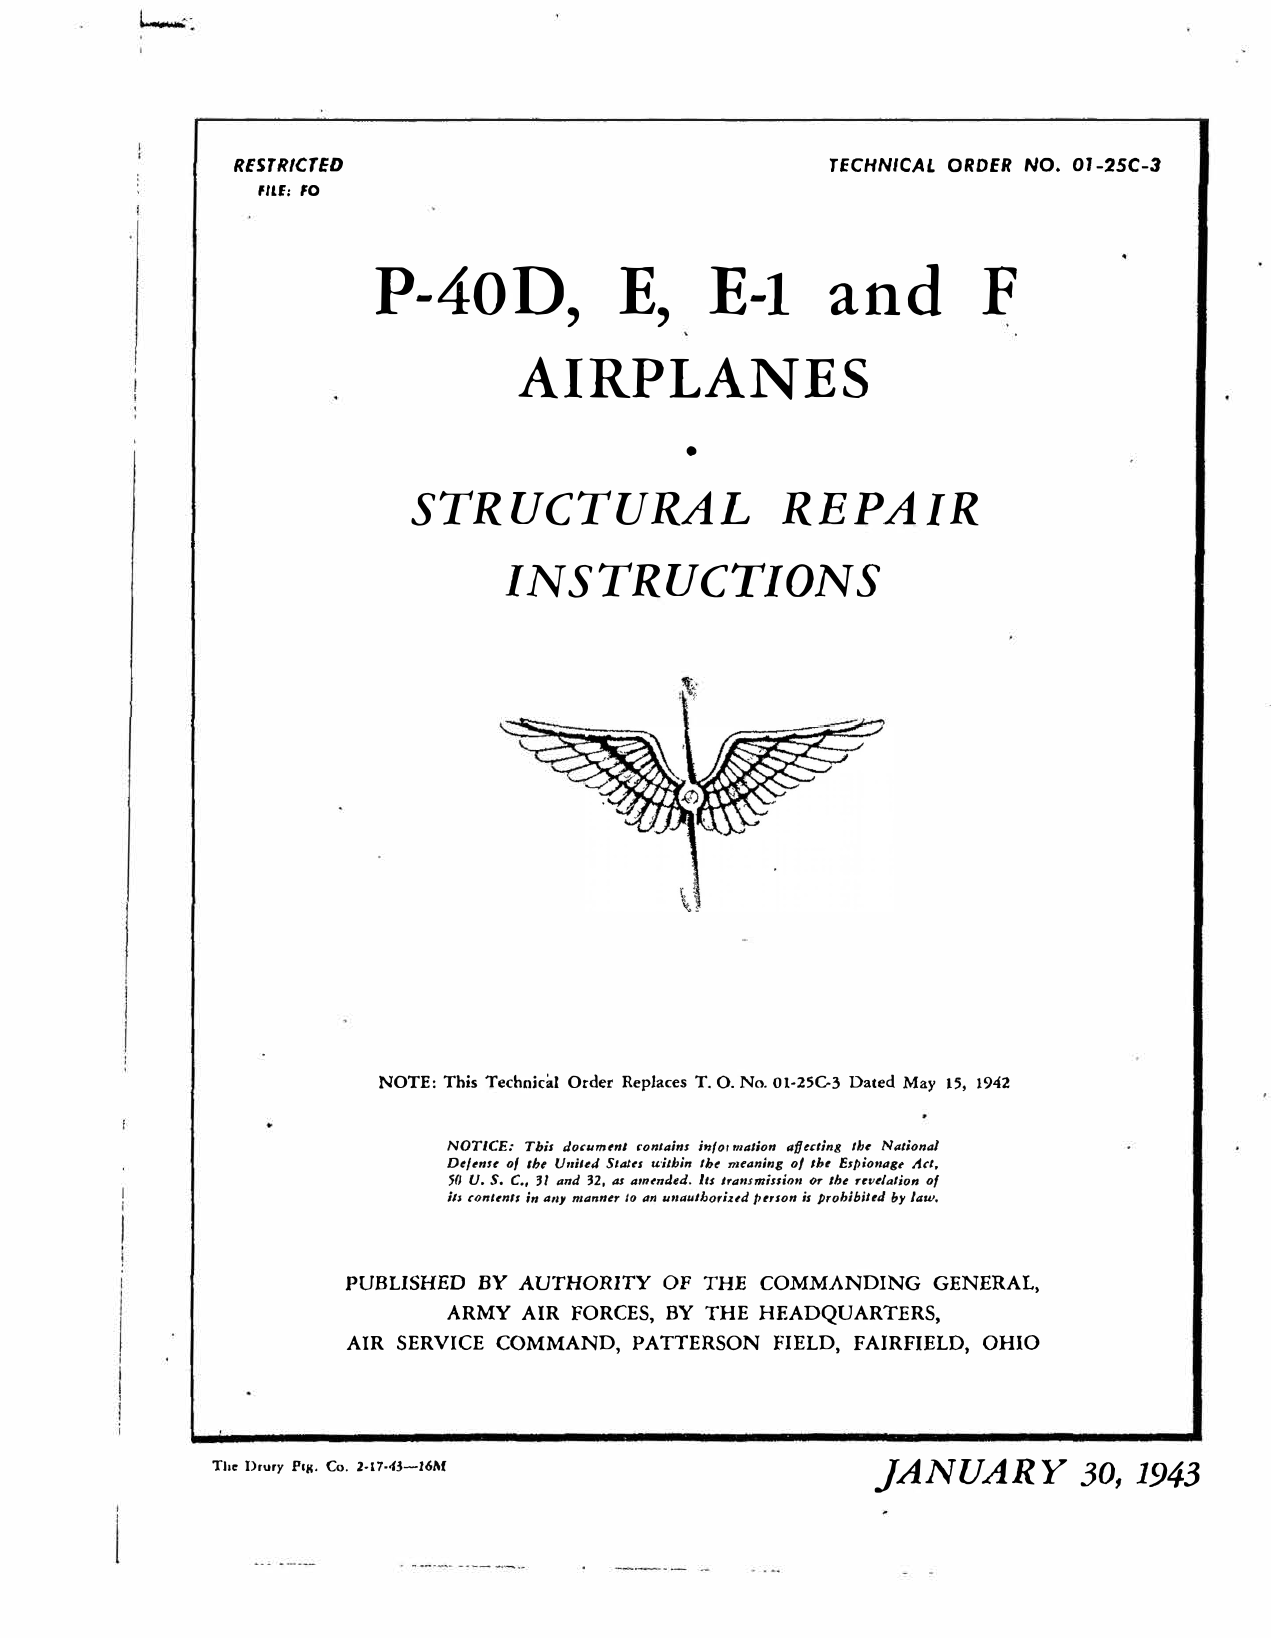 Sample page 1 from AirCorps Library document: Structural Repair Instructions - P-40D, P-40E, P-40F